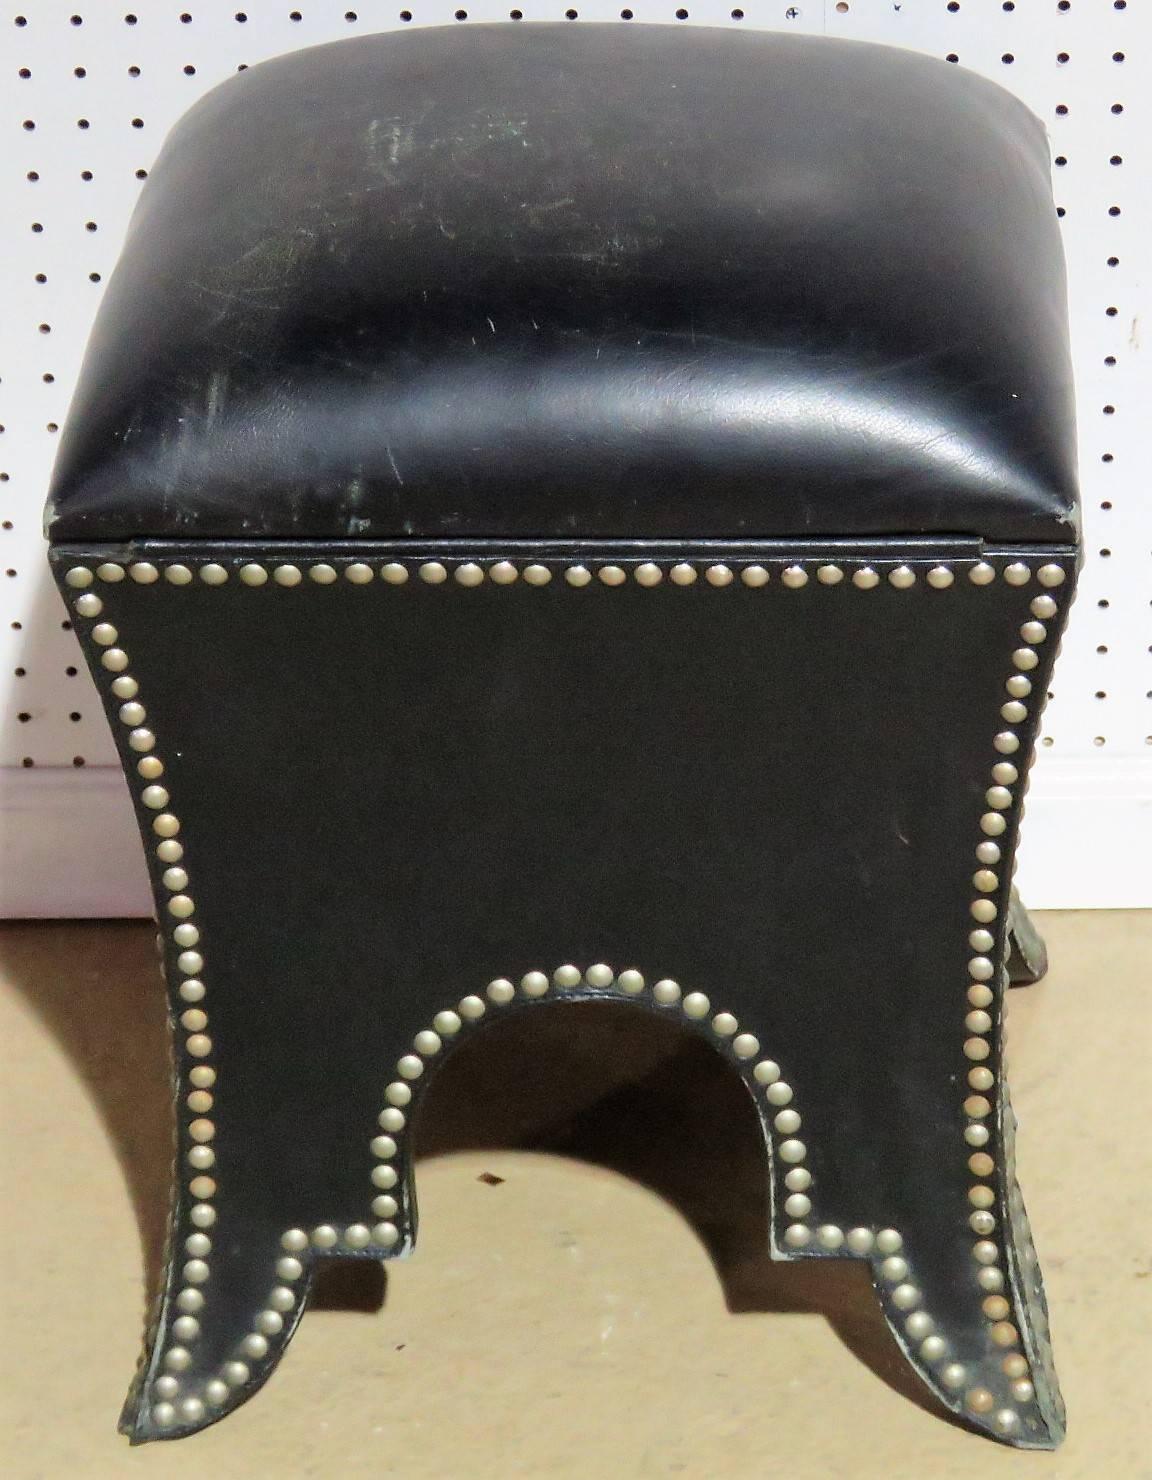 Black leather frame with studded edges. Lift top for storage.